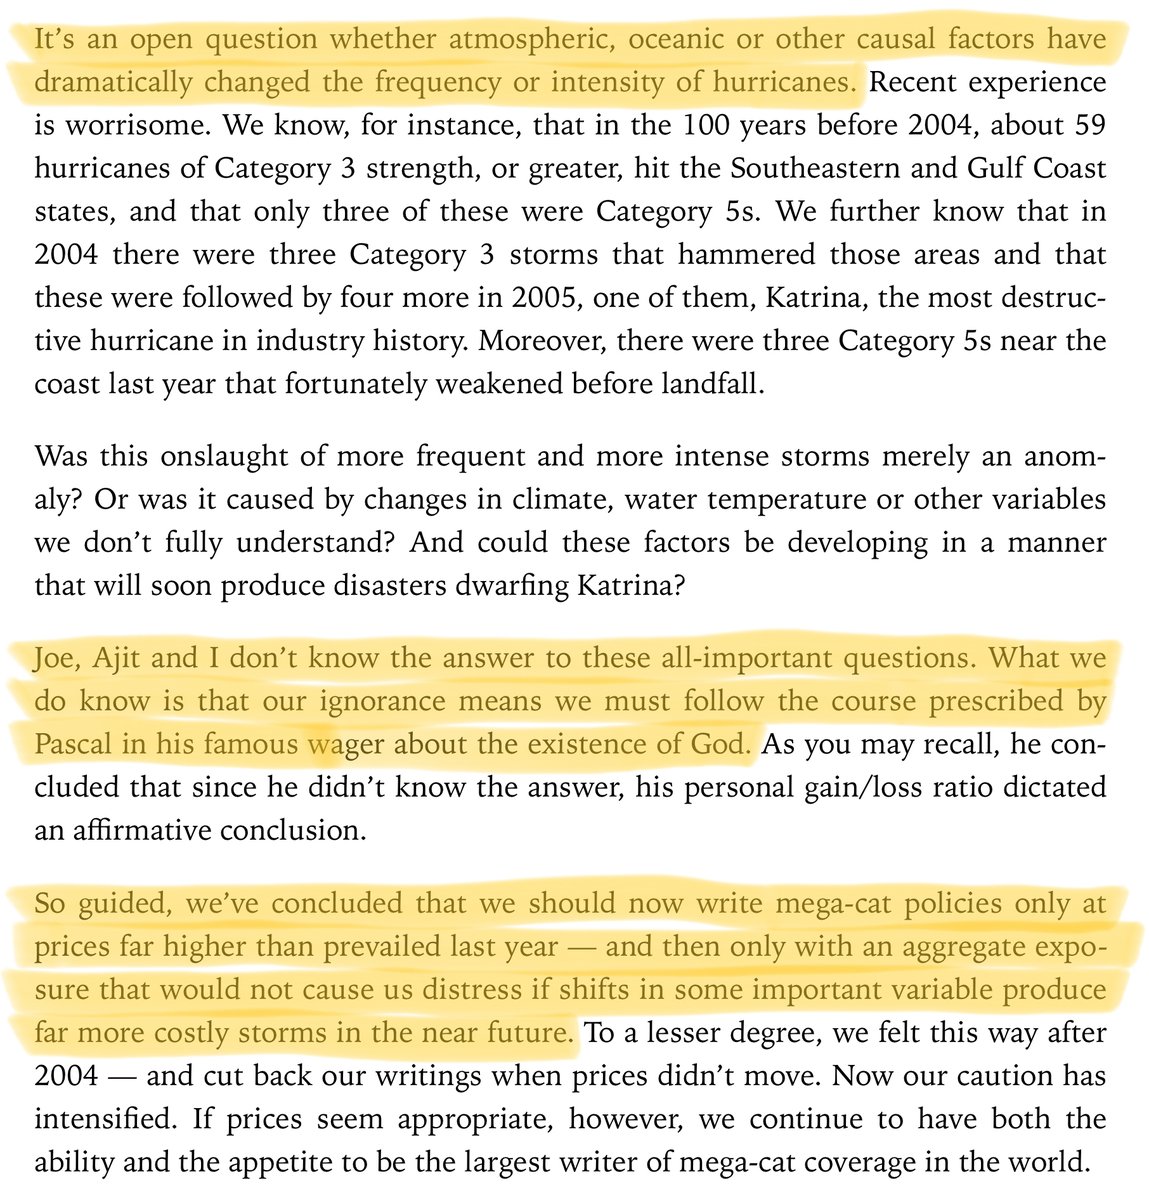 30/As usual, I'll leave you with a few references.Buffett's letters are a great resource if you want to understand probabilistic thinking in insurance applications (like the earthquake insurance example above).For example, here are excerpts from his 1997 and 2005 letters: